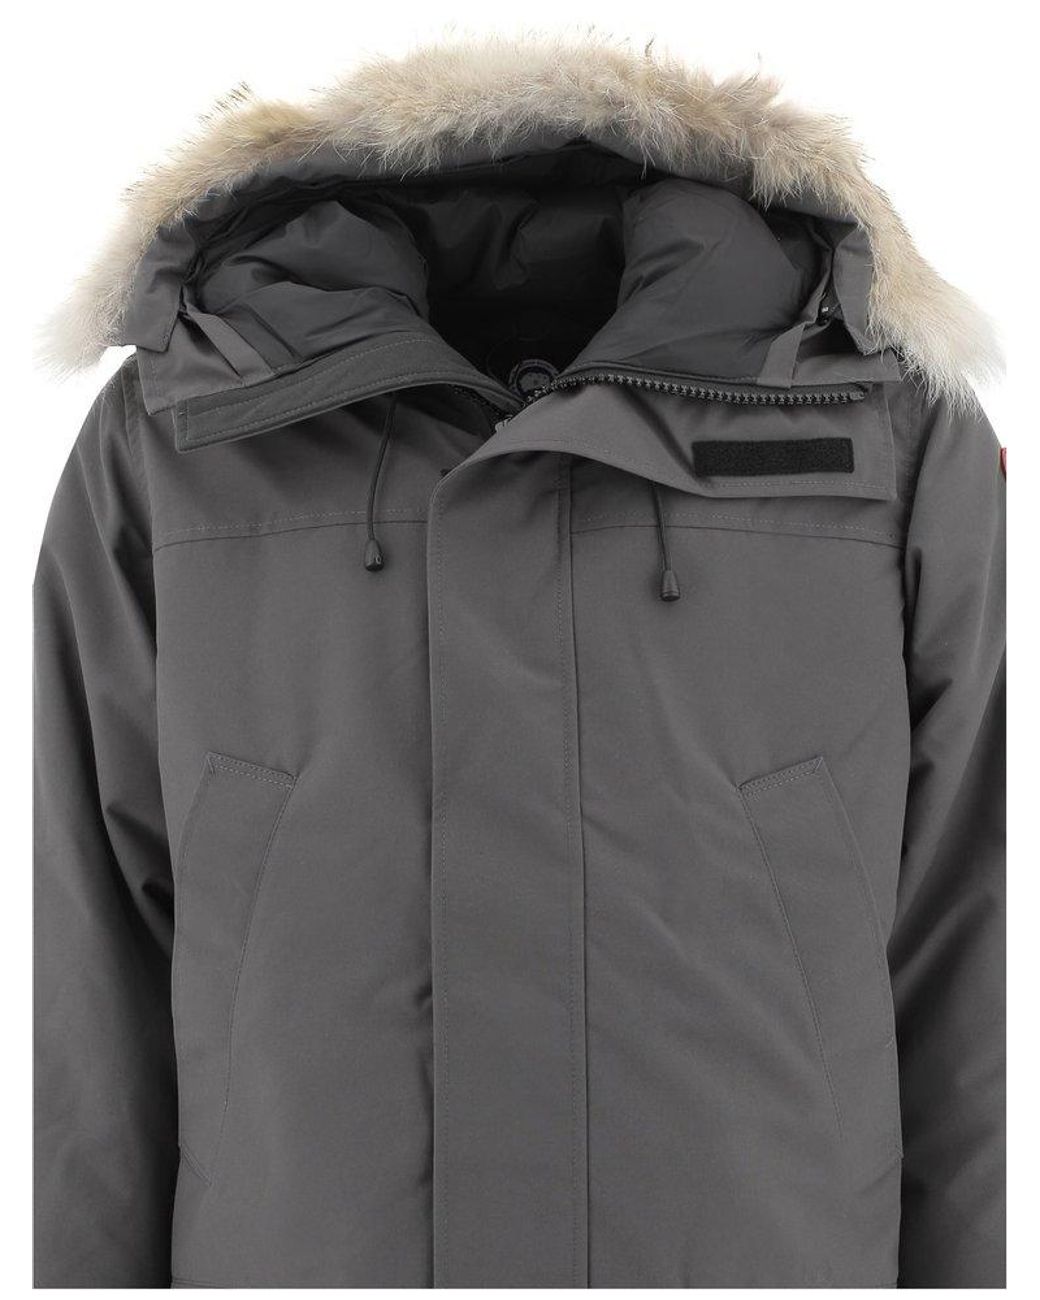 Canada Goose "langford" Parka in Grey (Gray) for Men - Save 1% | Lyst